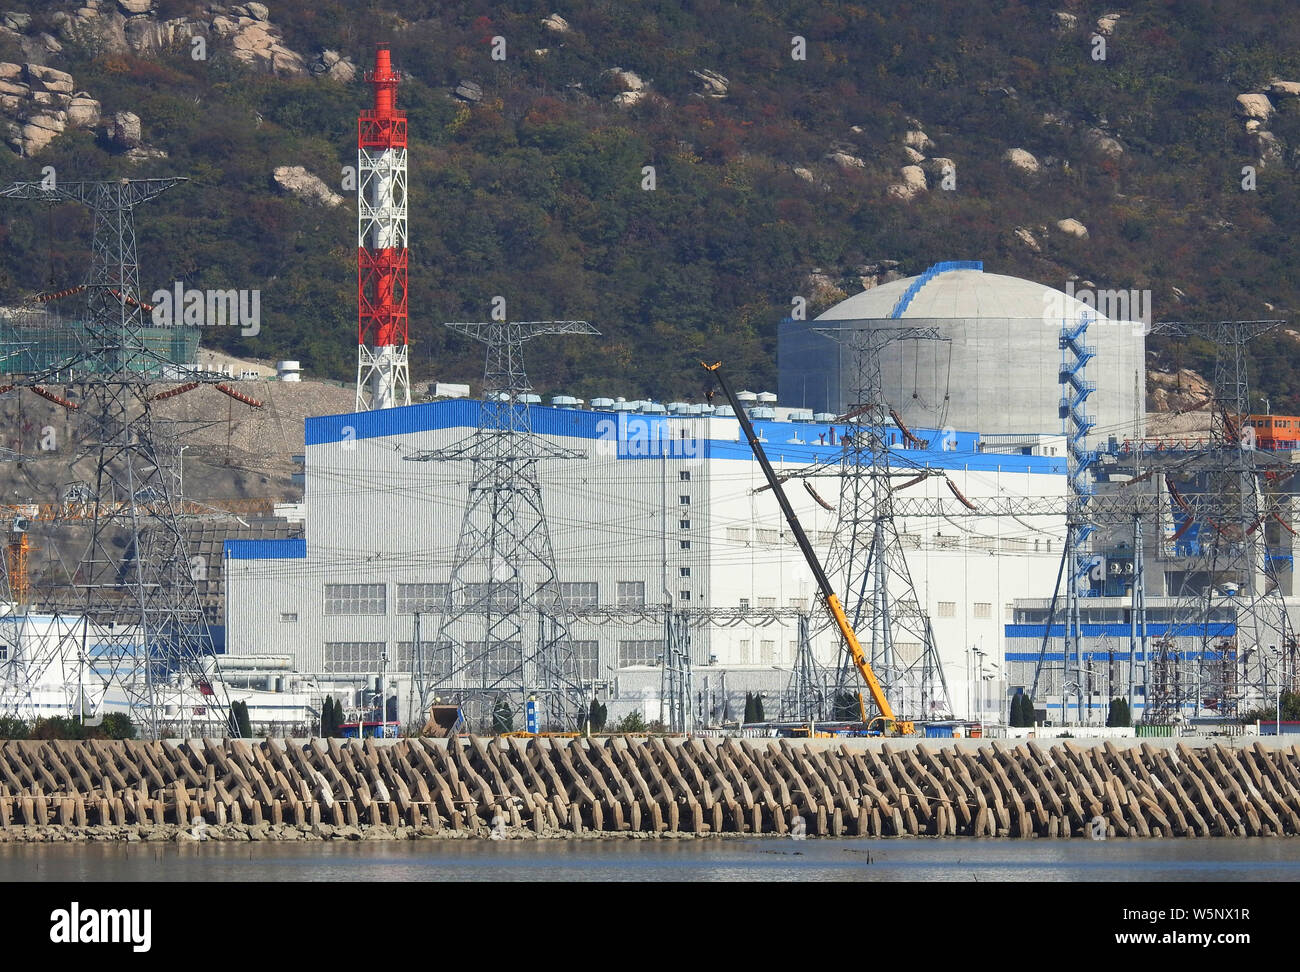 --FILE--View of the Tianwan nuclear power plant Unit 4 in Lianyungang city, east China's Jiangsu province, 27 October 2018.   Chinese scientists have Stock Photo